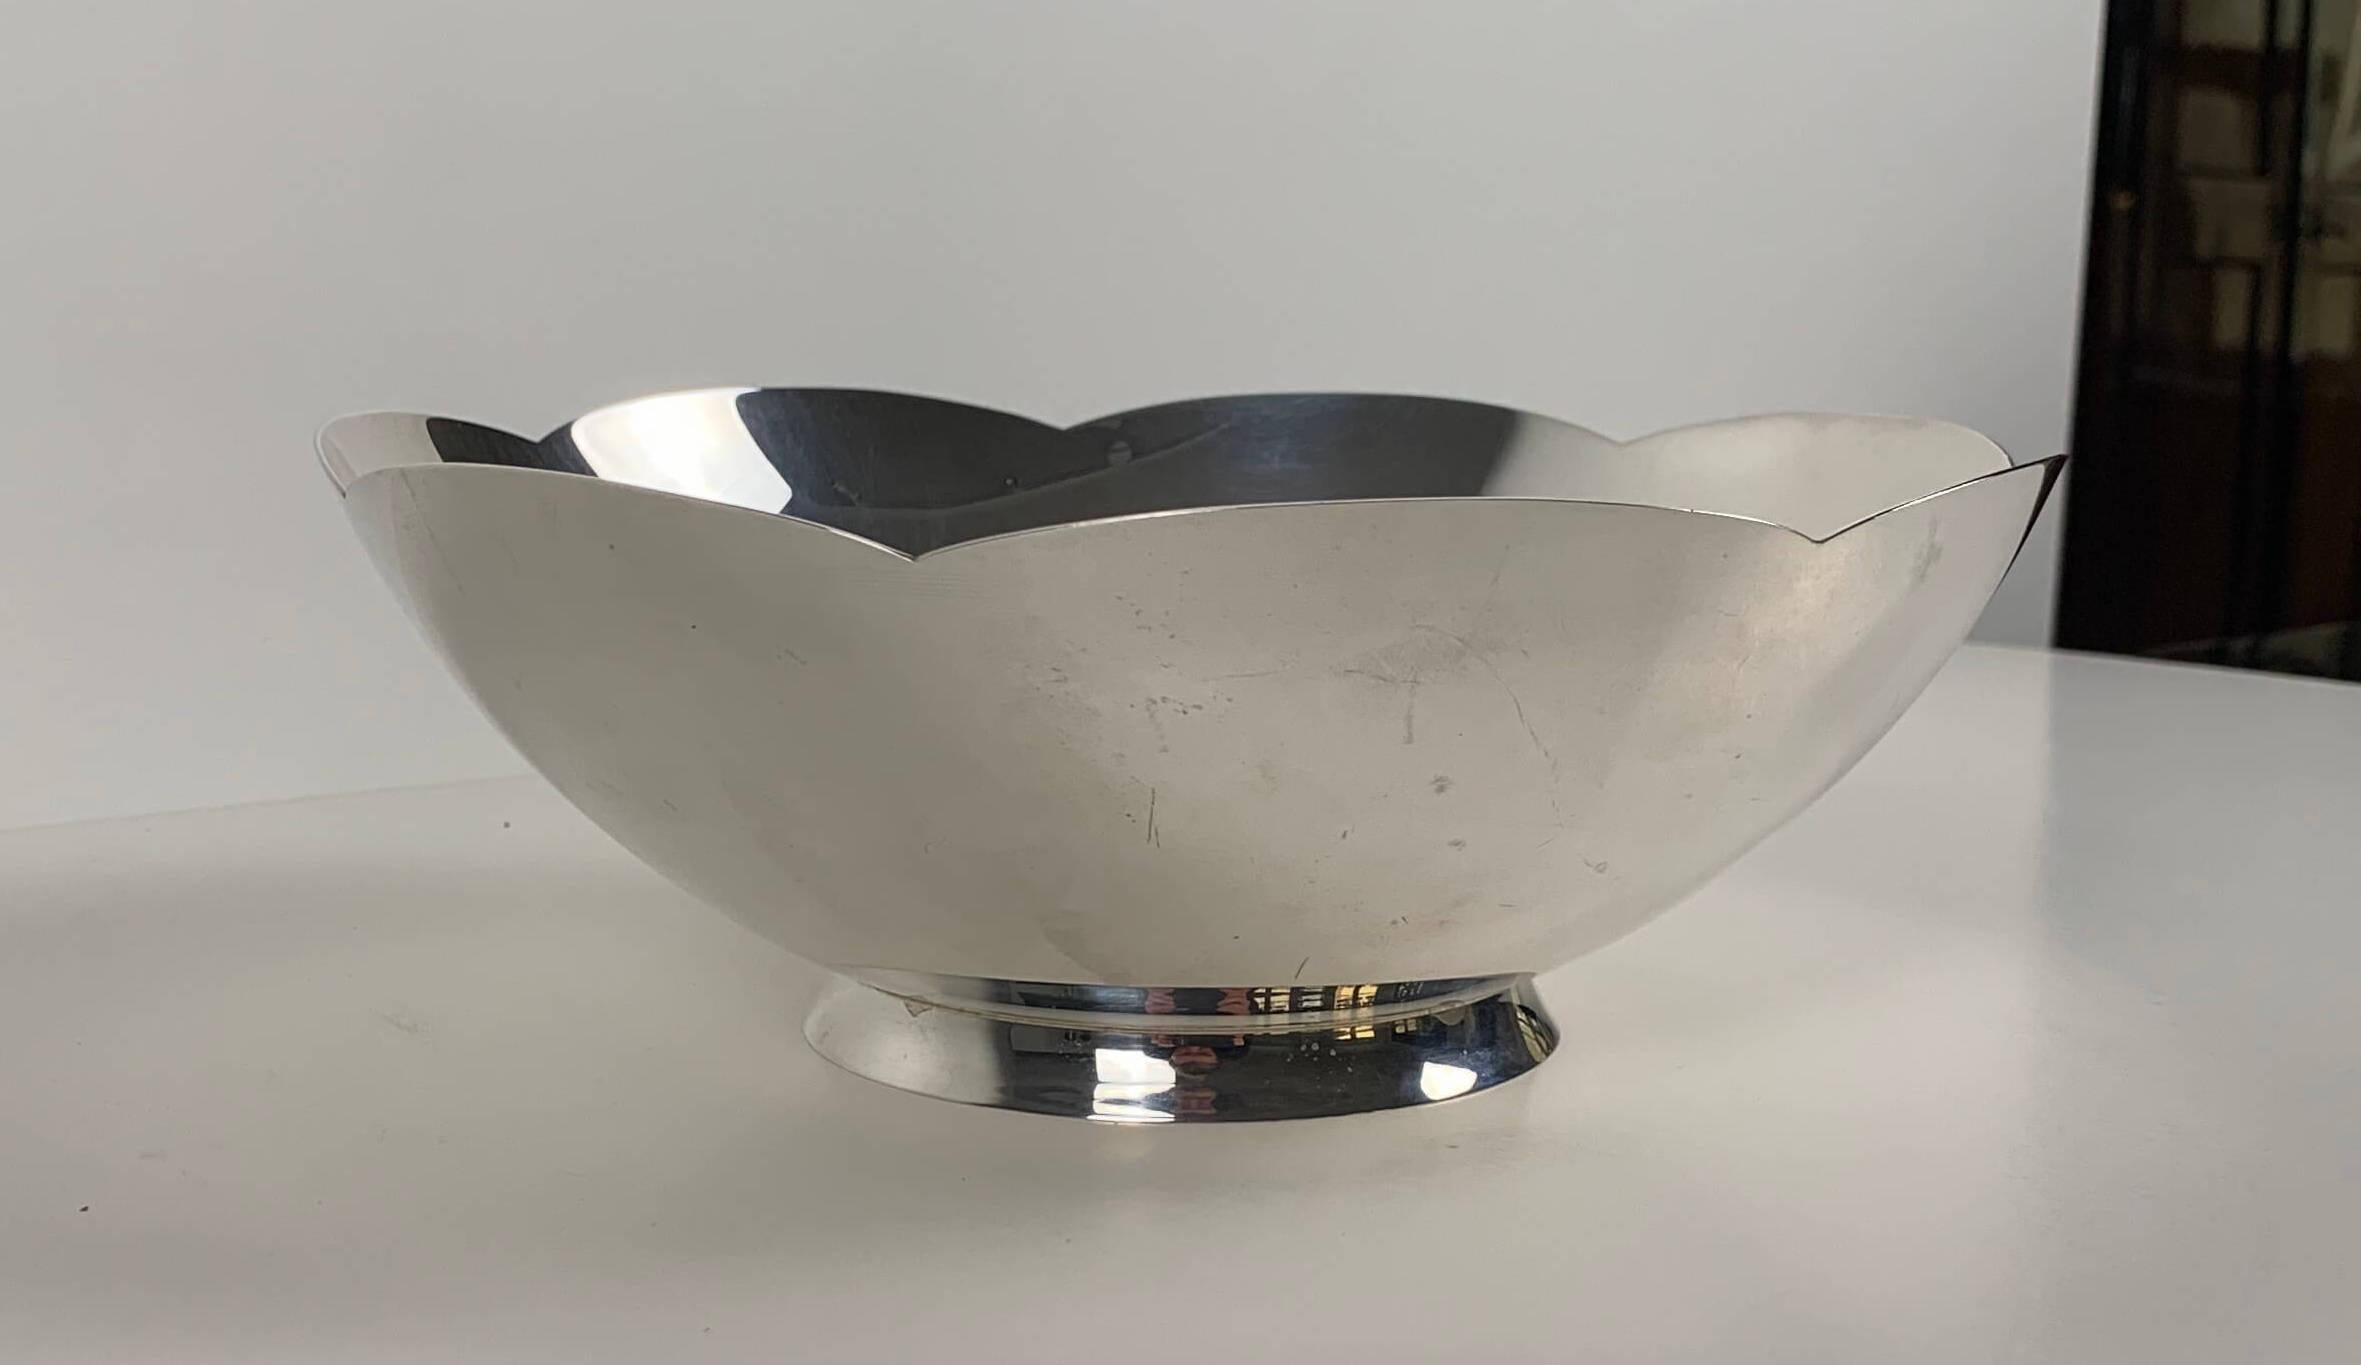 20th Century Art Deco Bowl by Tiffany & Co., New York, Sterling Silver, 1920-40s